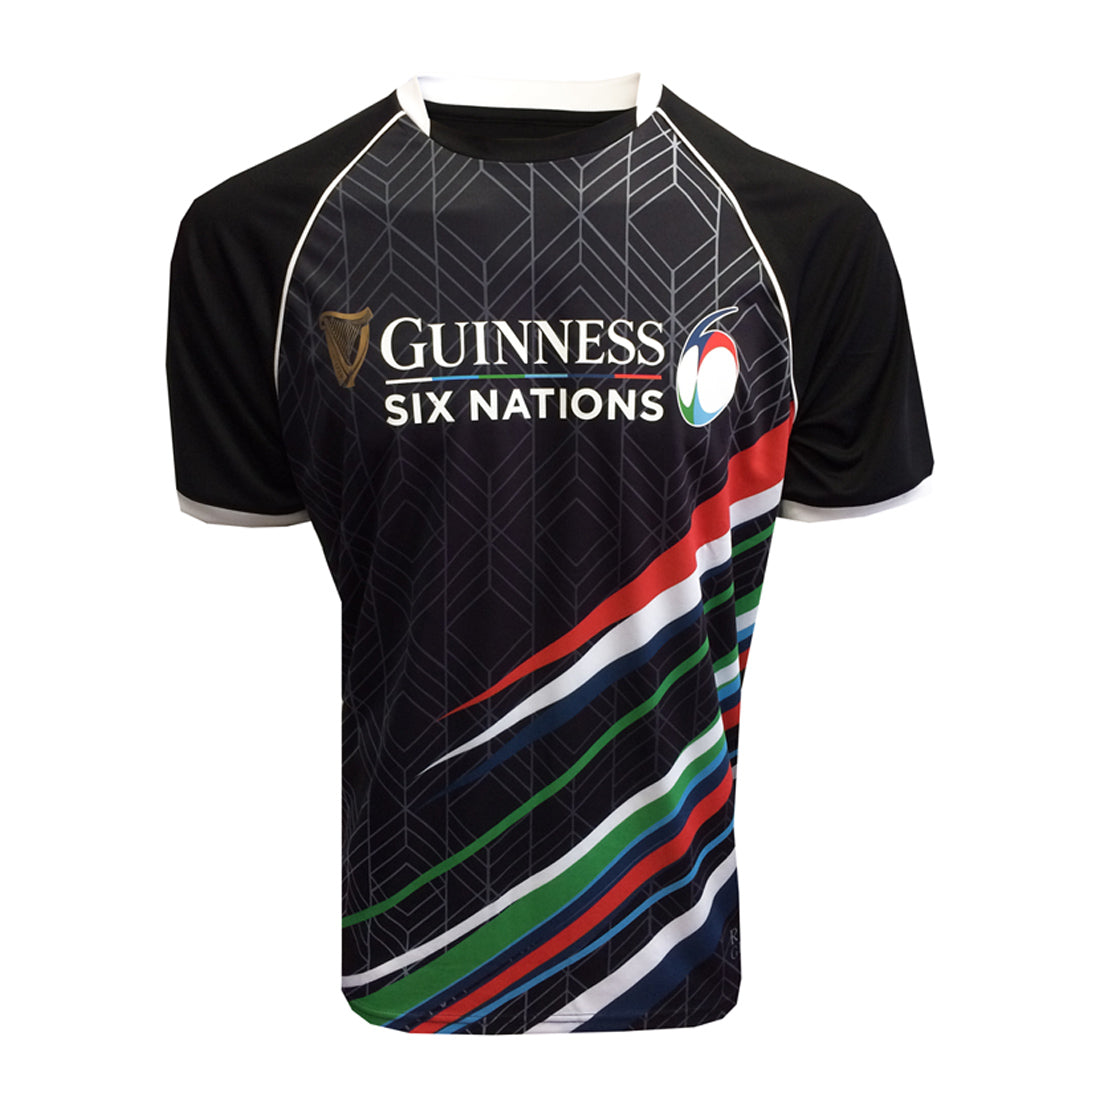 A black Guinness performance tee designed for the rugby fan, featuring geometric patterns, the Guinness Six Nations logo, and colorful stripes representing various team colors.